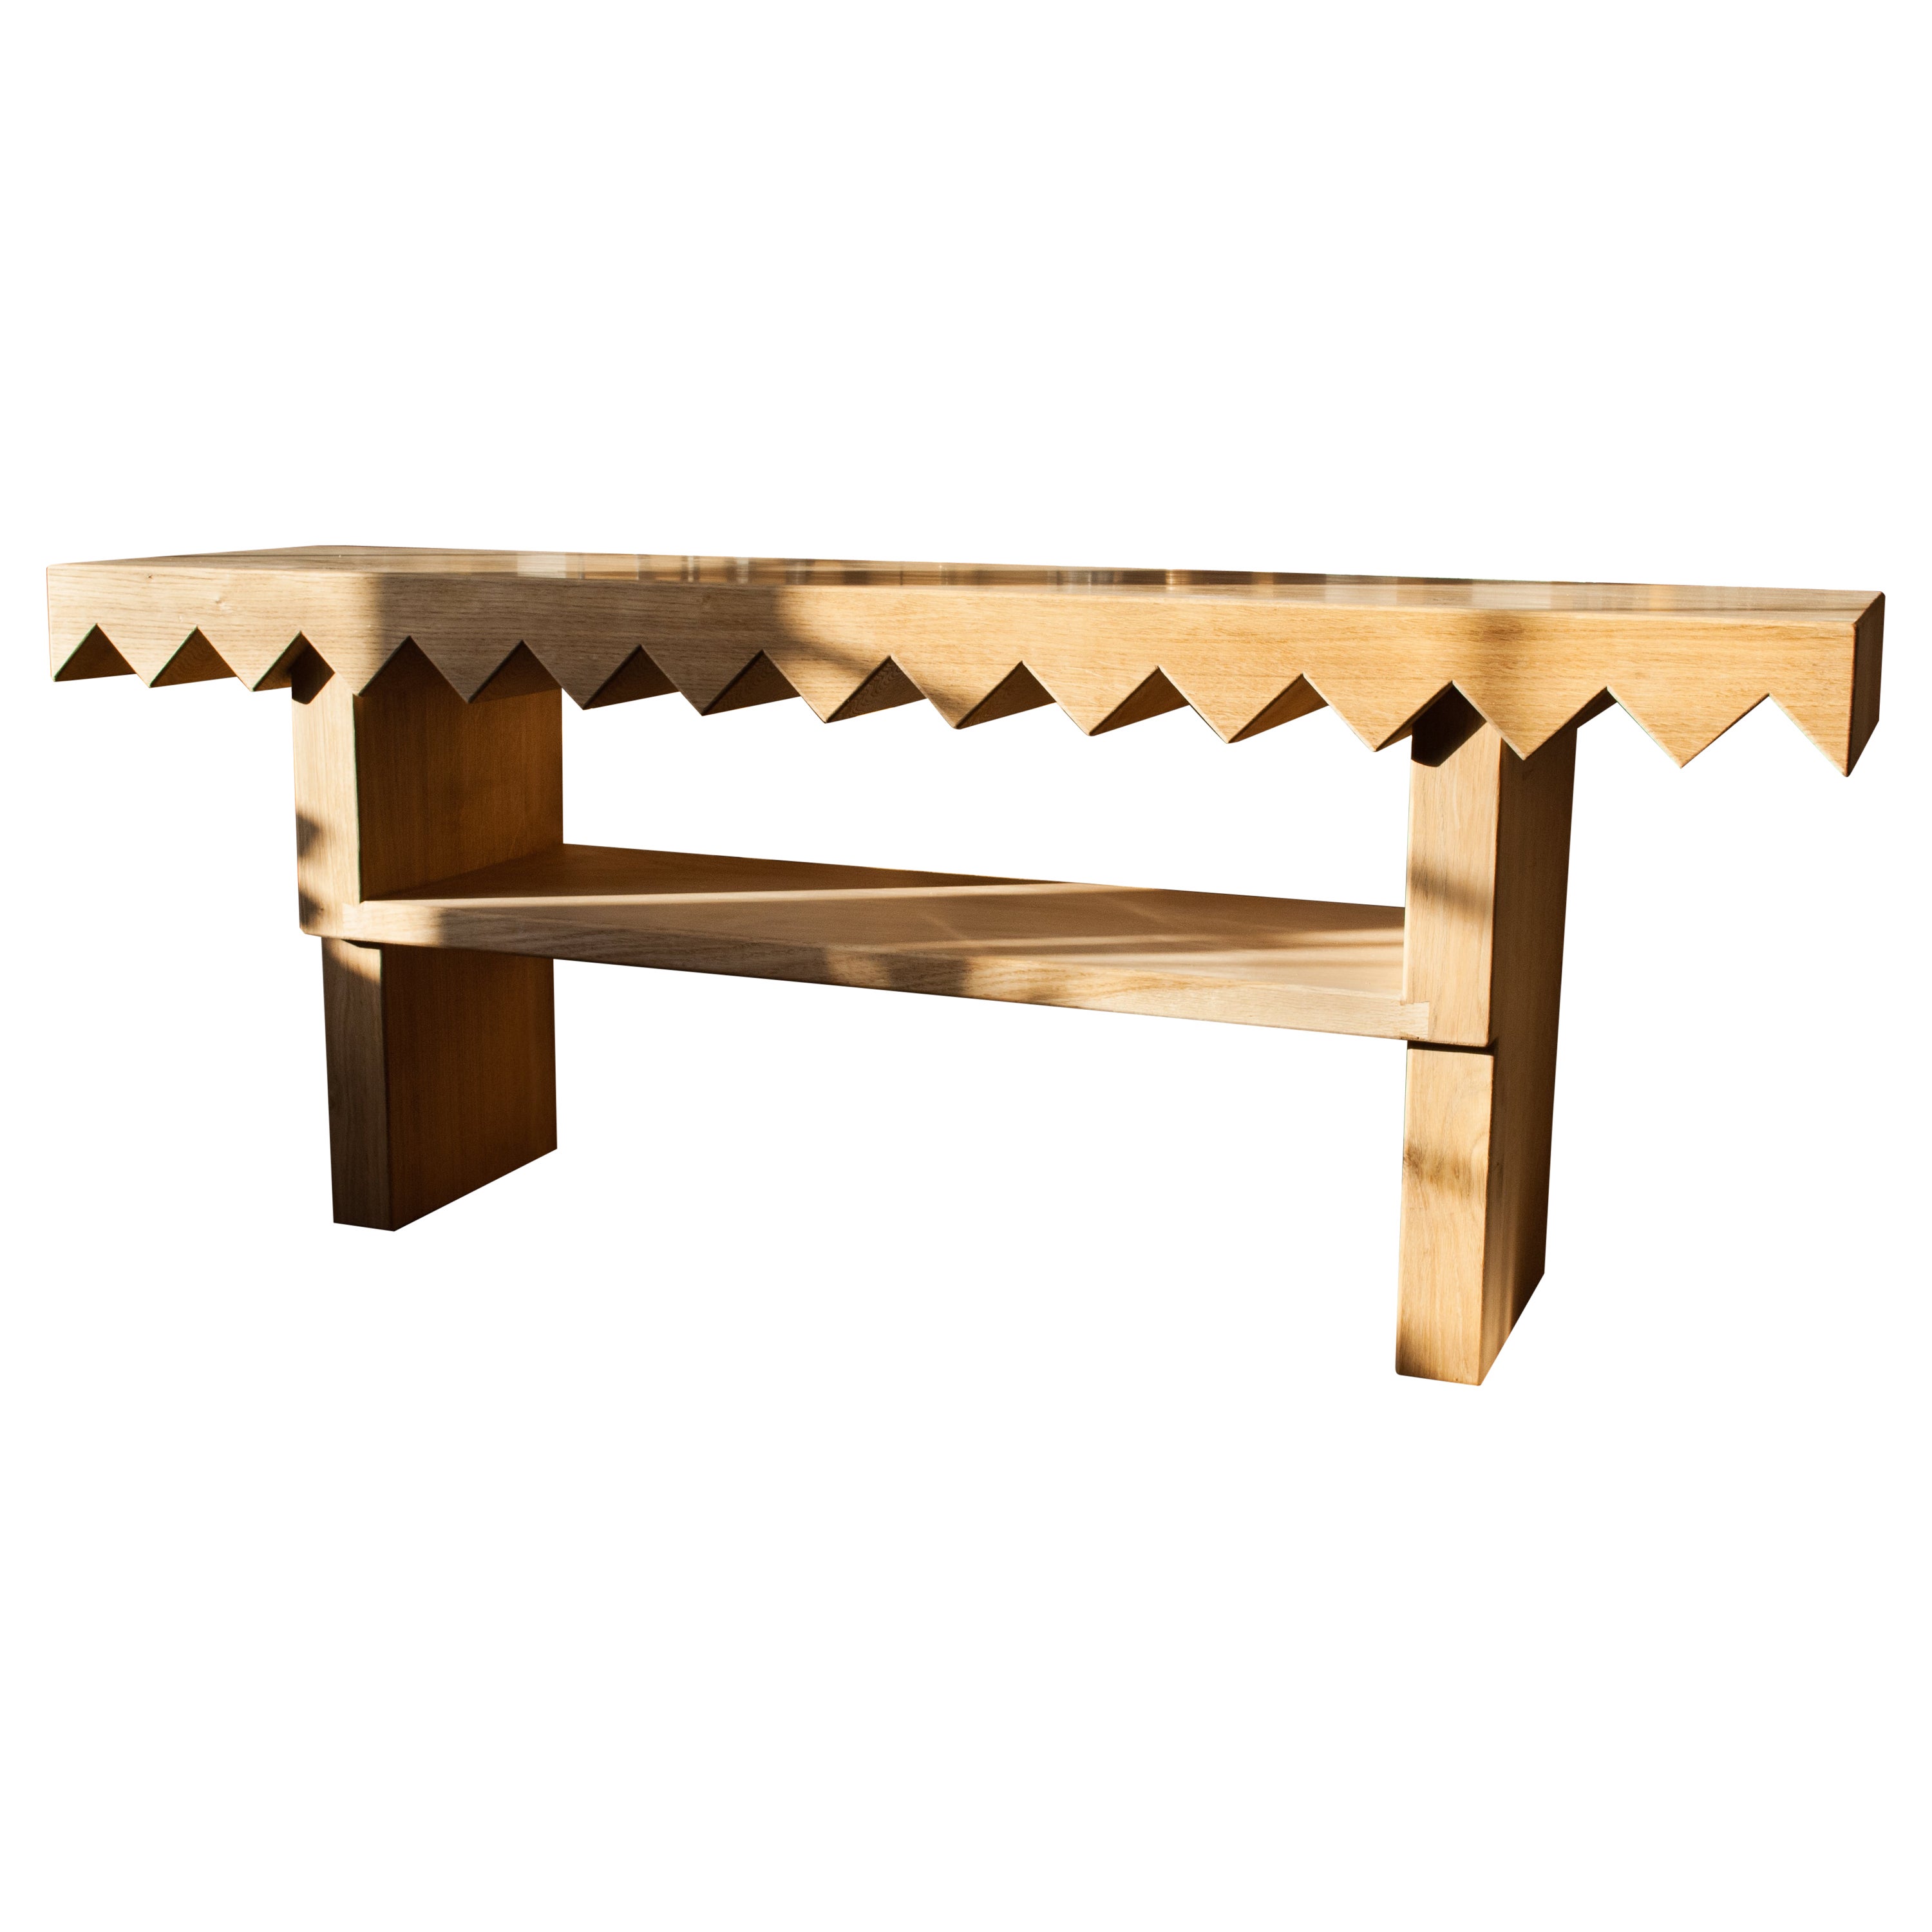 Sawtooth Bench in Solid English Oak Designed and Handmade by Loose Fit in the UK For Sale